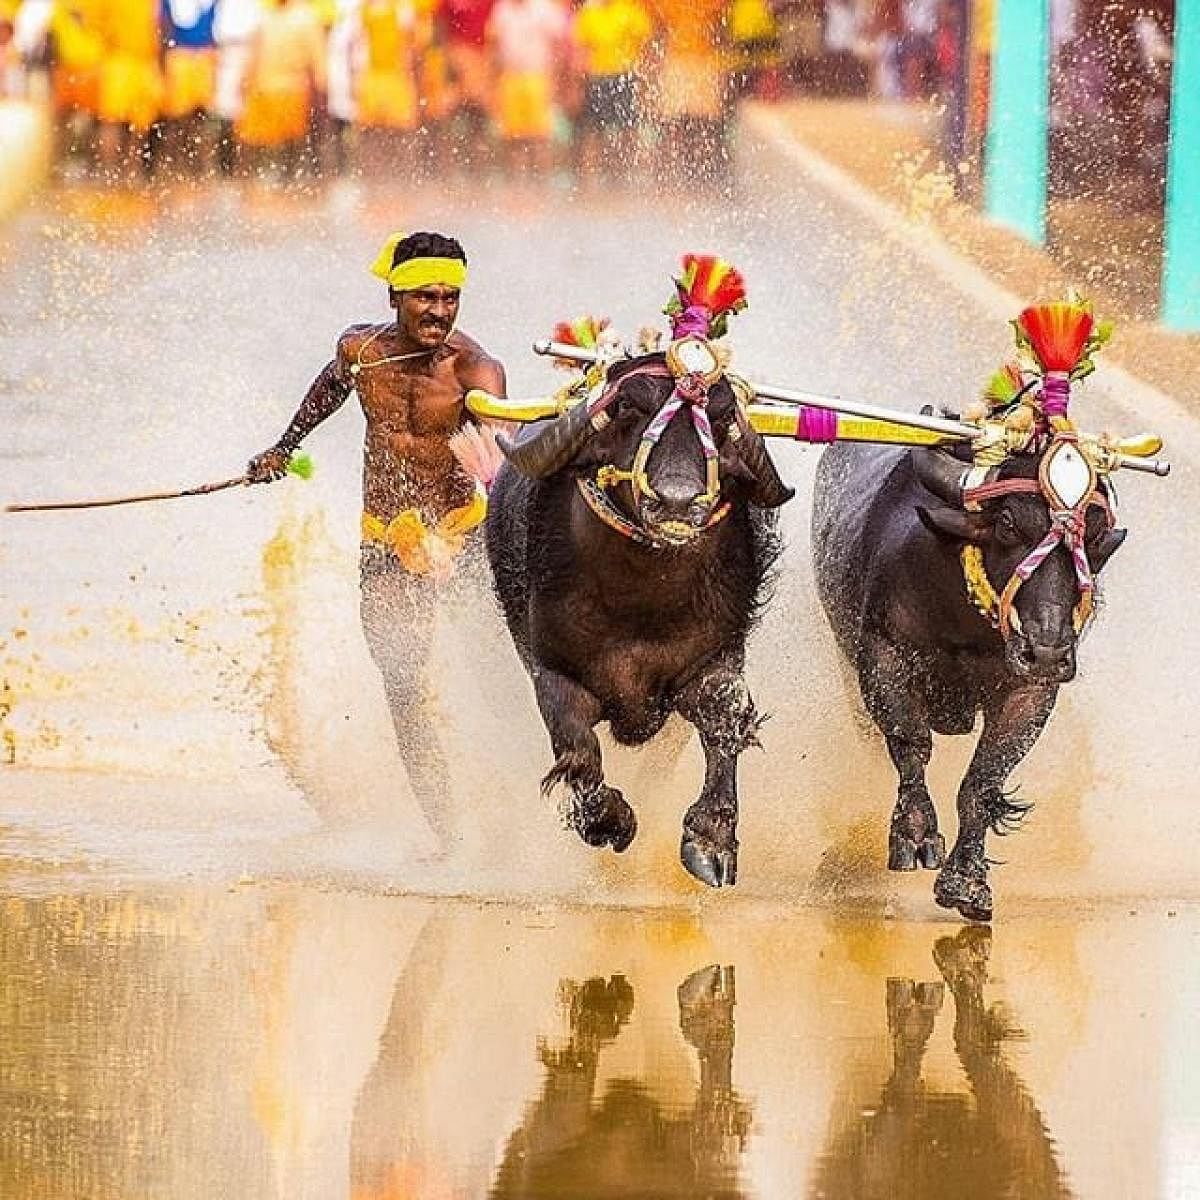 Srinivas Gowda had been compared to Usain Bolt in his speed after he had completed 145 metres in a record 13.61 seconds during the Kambala last year. Credit: DH